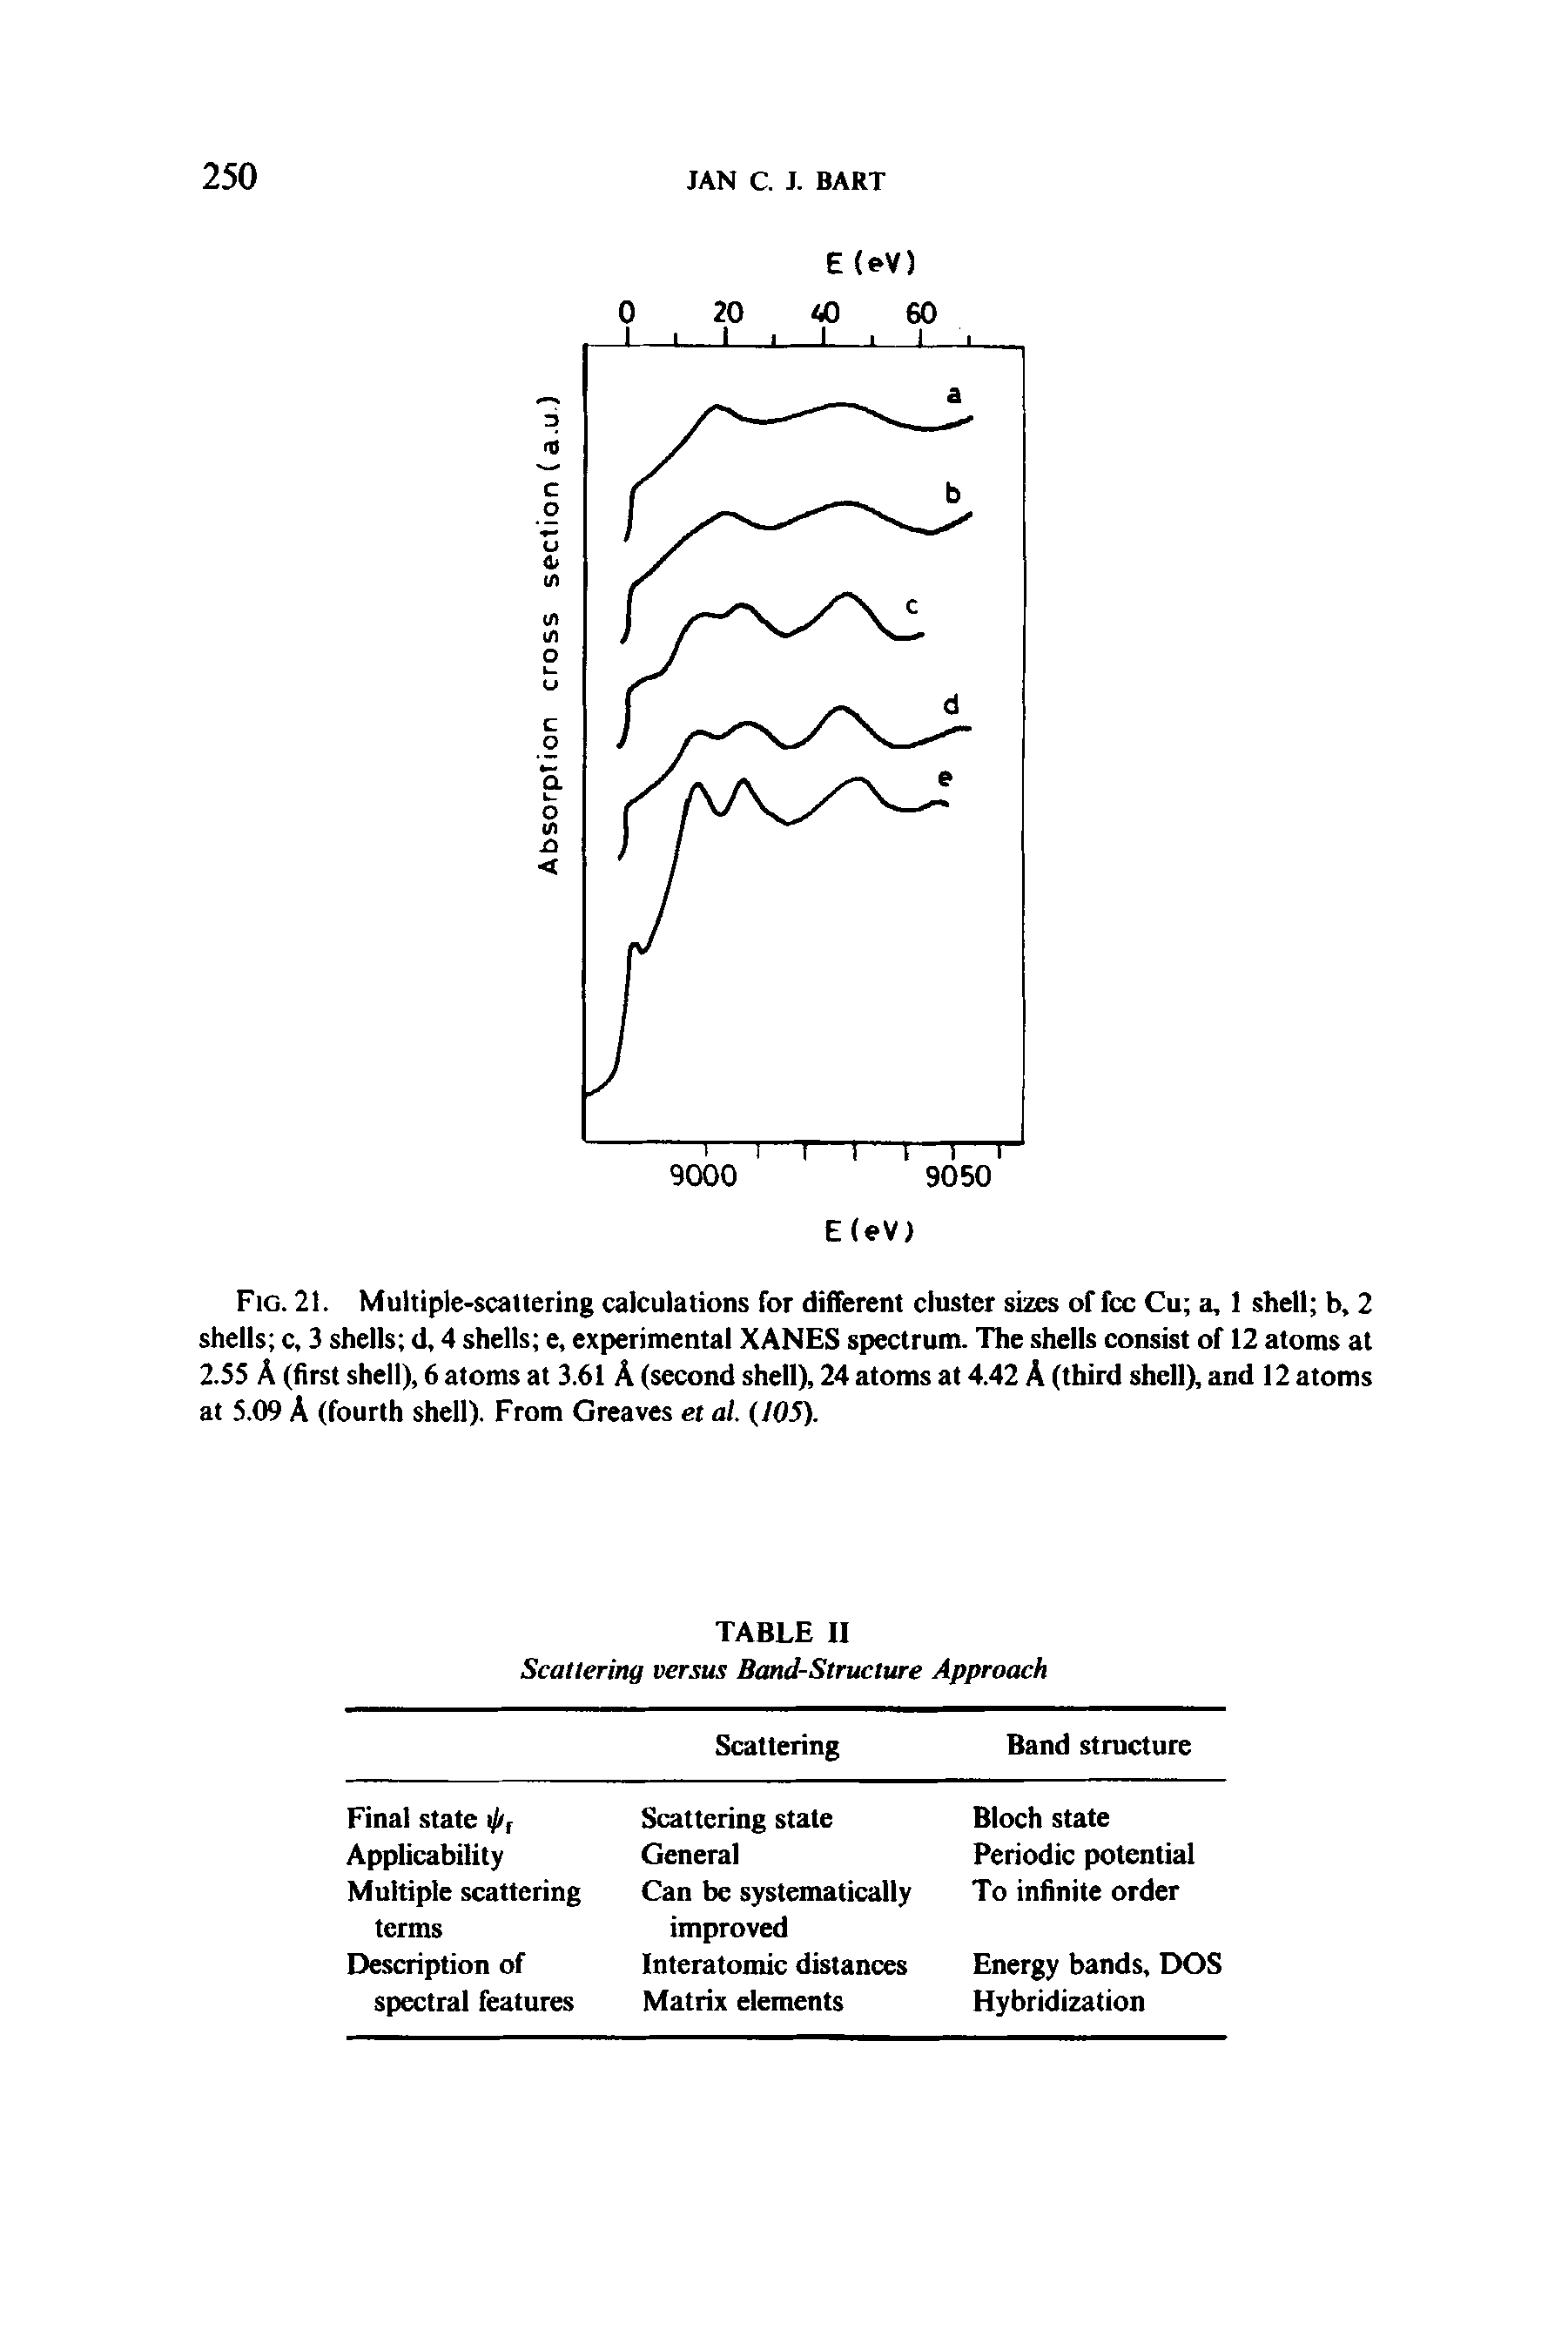 Fig. 21. Multiple-scattering calculations for different cluster sizes of fee Cu a, 1 shell b, 2 shells c, 3 shells d, 4 shells e, experimental XANES spectrum. The shells consist of 12 atoms at 2.55 A (first shell), 6 atoms at 3.61 A (second shell), 24 atoms at 4.42 A (third shell), and 12 atoms at 5.09 A (fourth shell). From Greaves er al. (105).